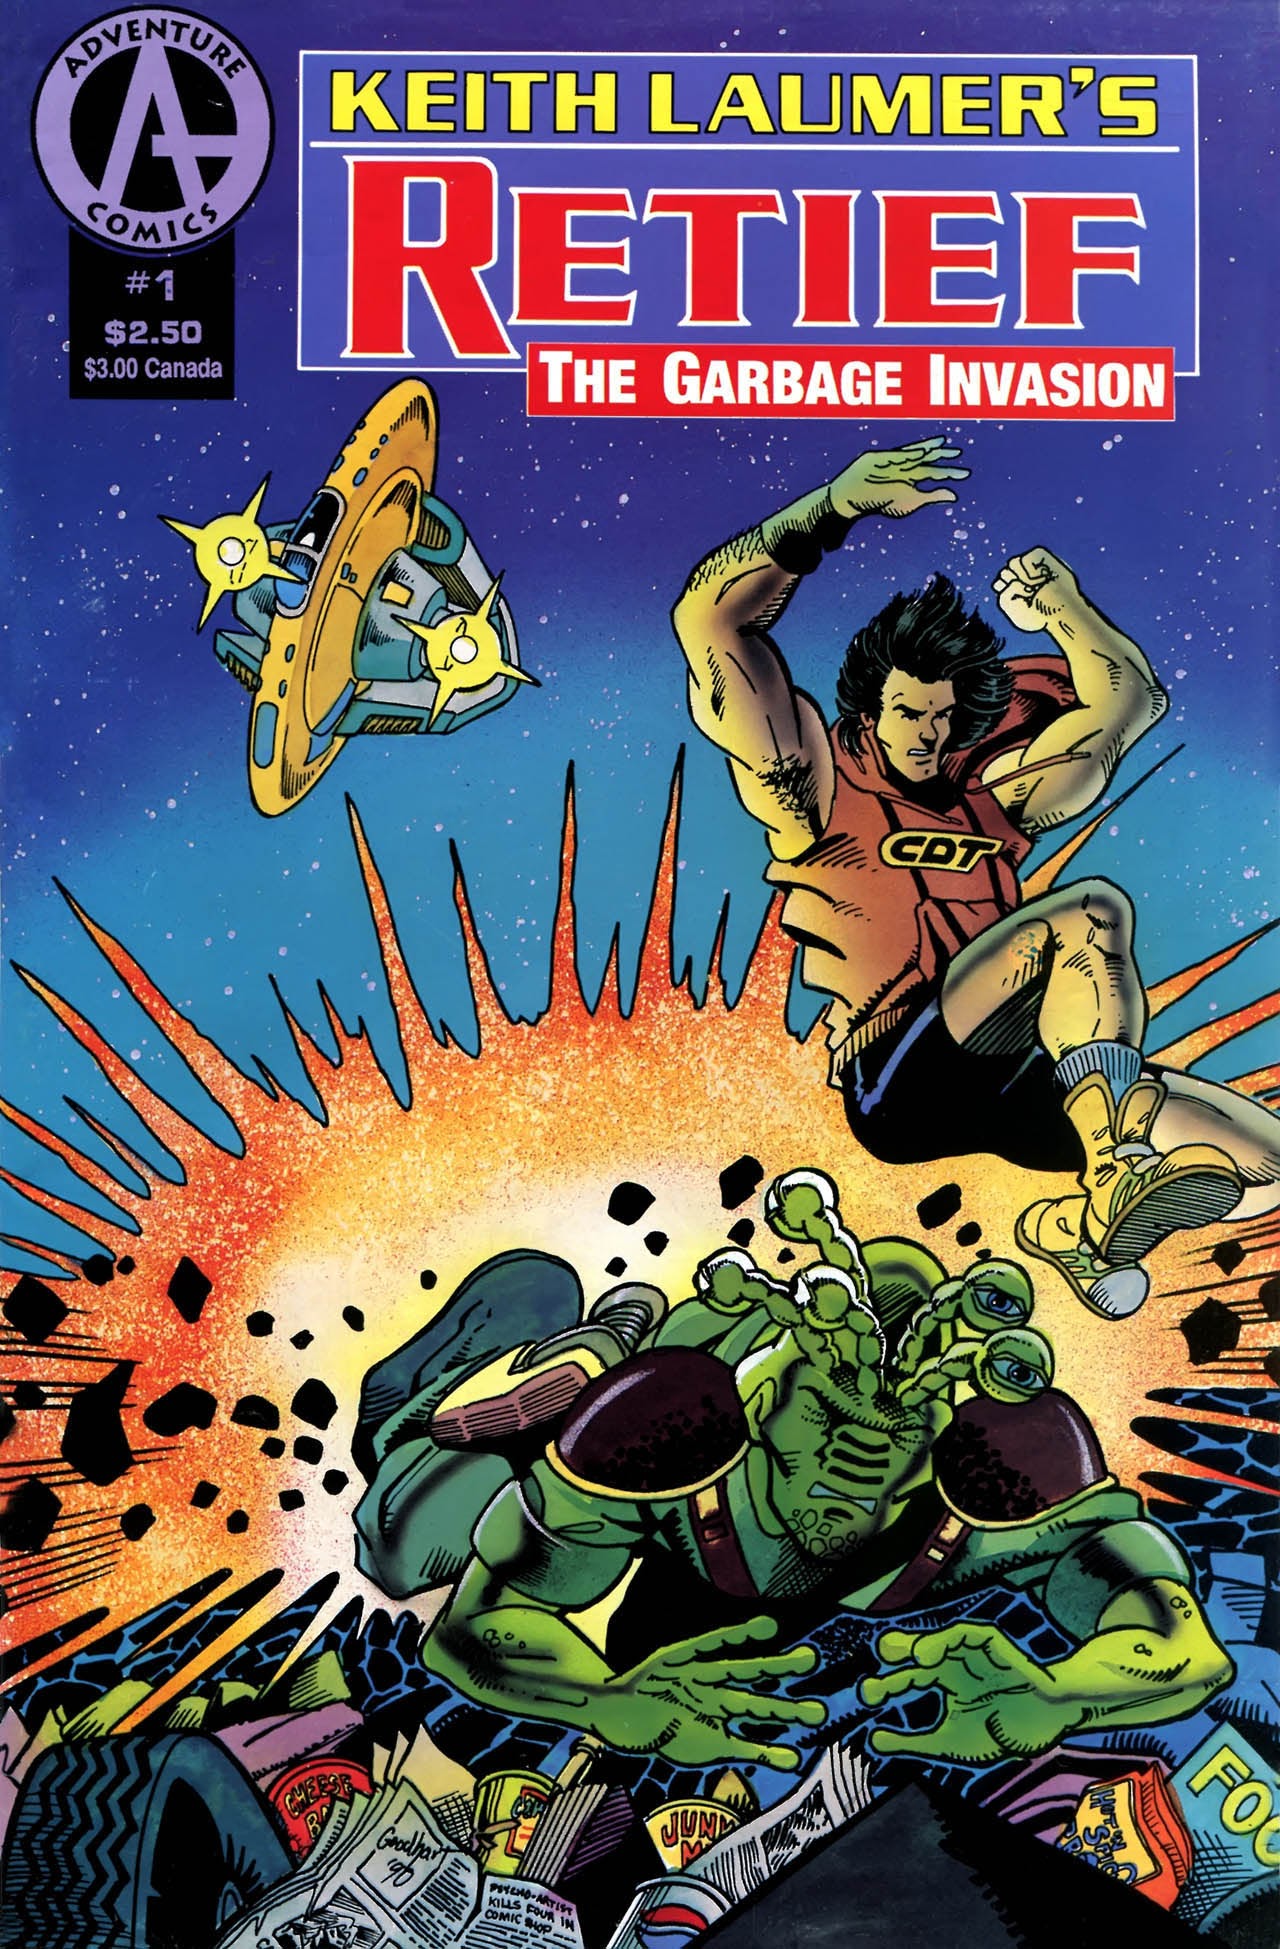 Read online Retief: The Garbage Invasion comic -  Issue # Full - 1